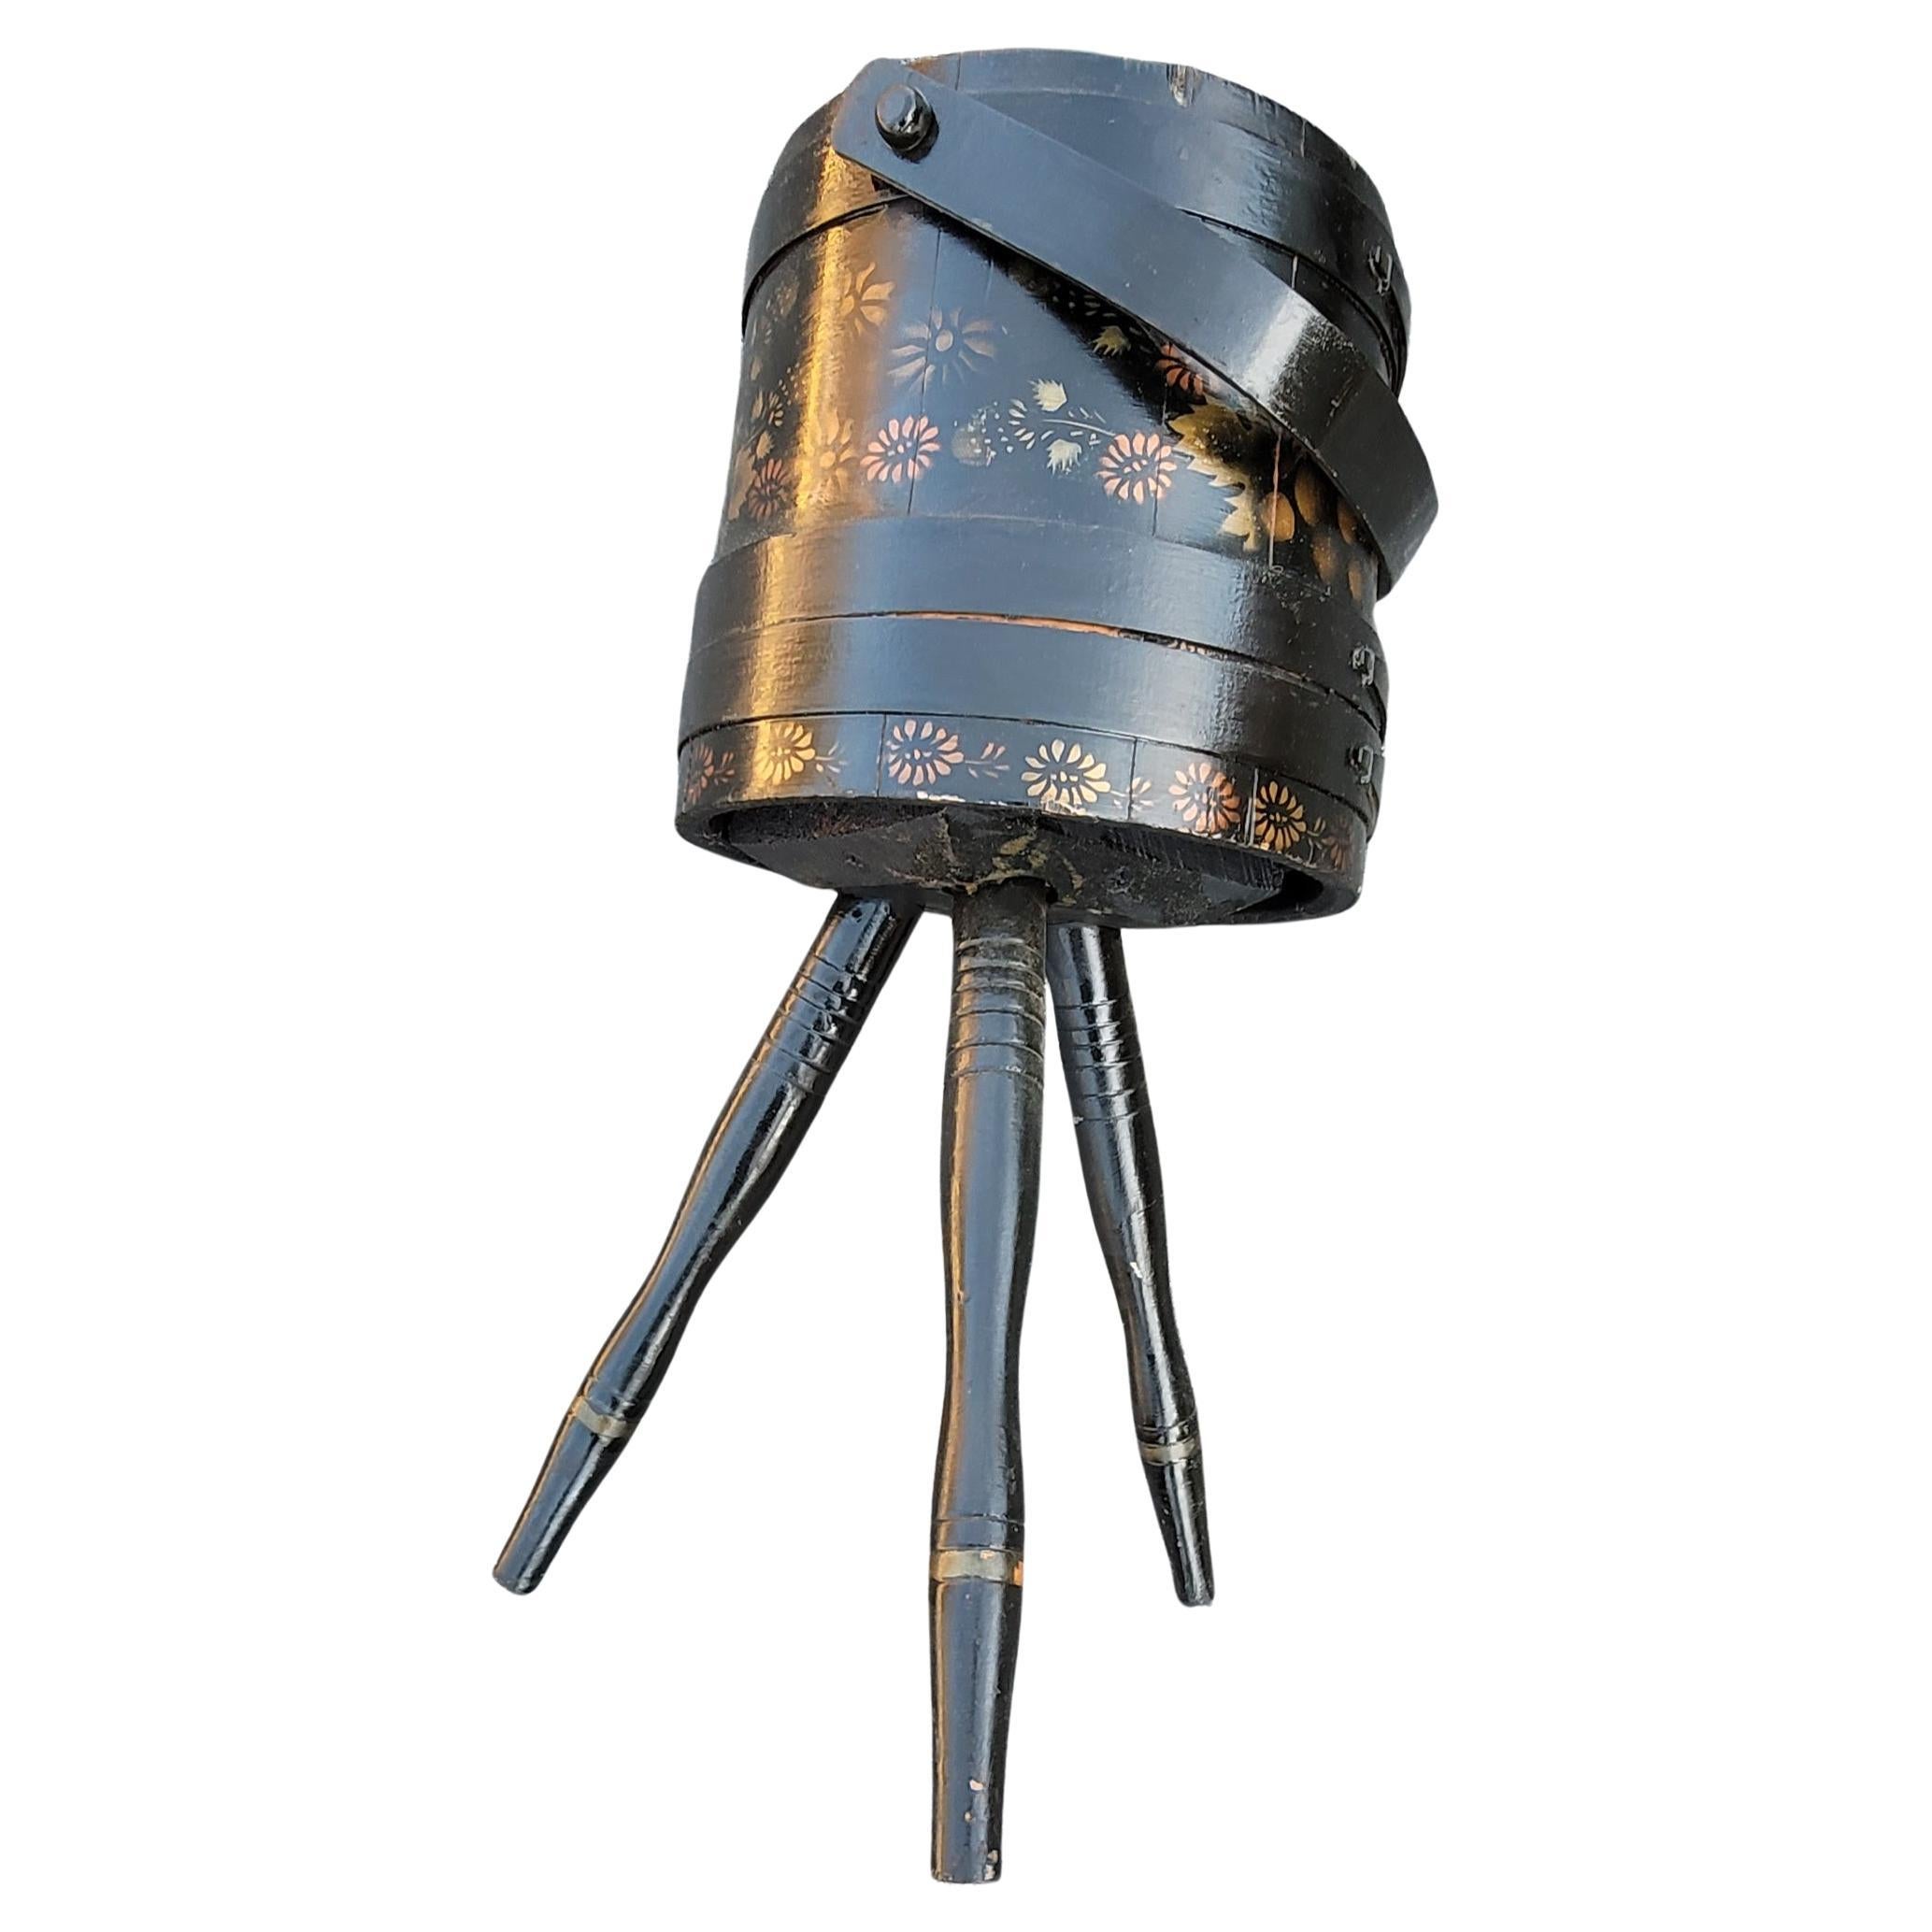 20th Century 1920s Hand-Crafted, Painted and Decorated Tripod Firkin or Sewing Bucket For Sale